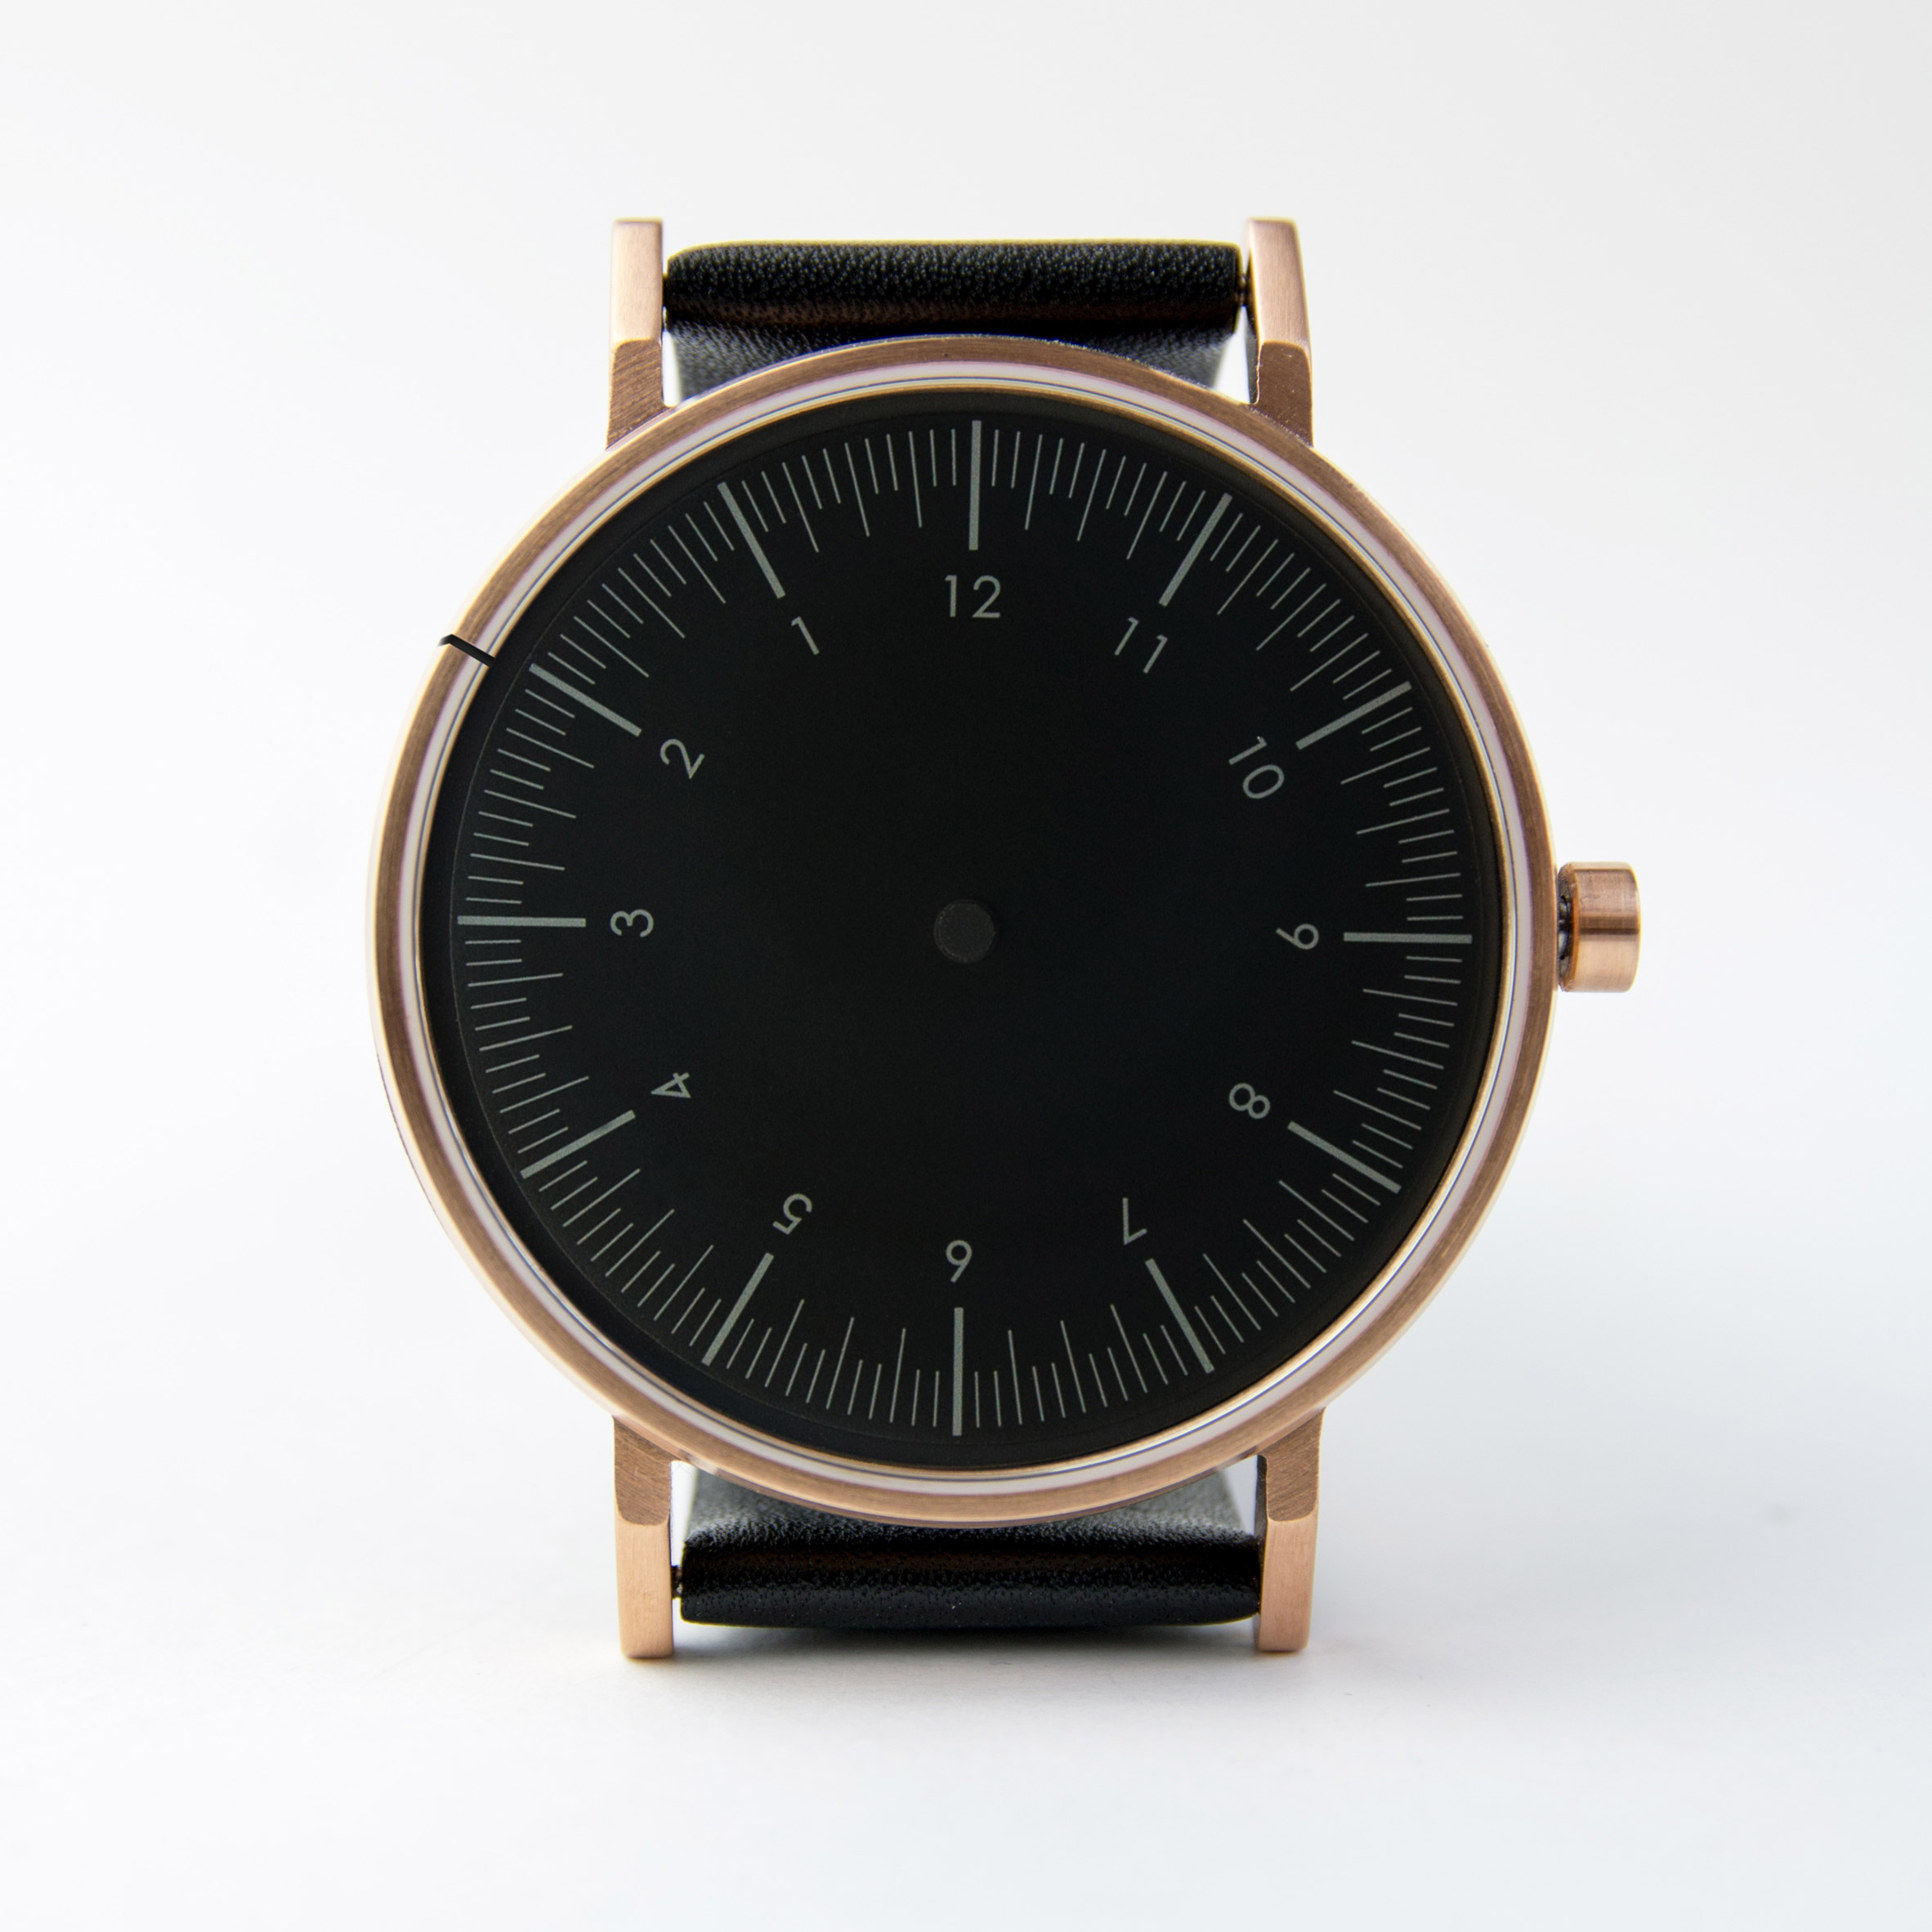 Win a Reverse watch from Simpl